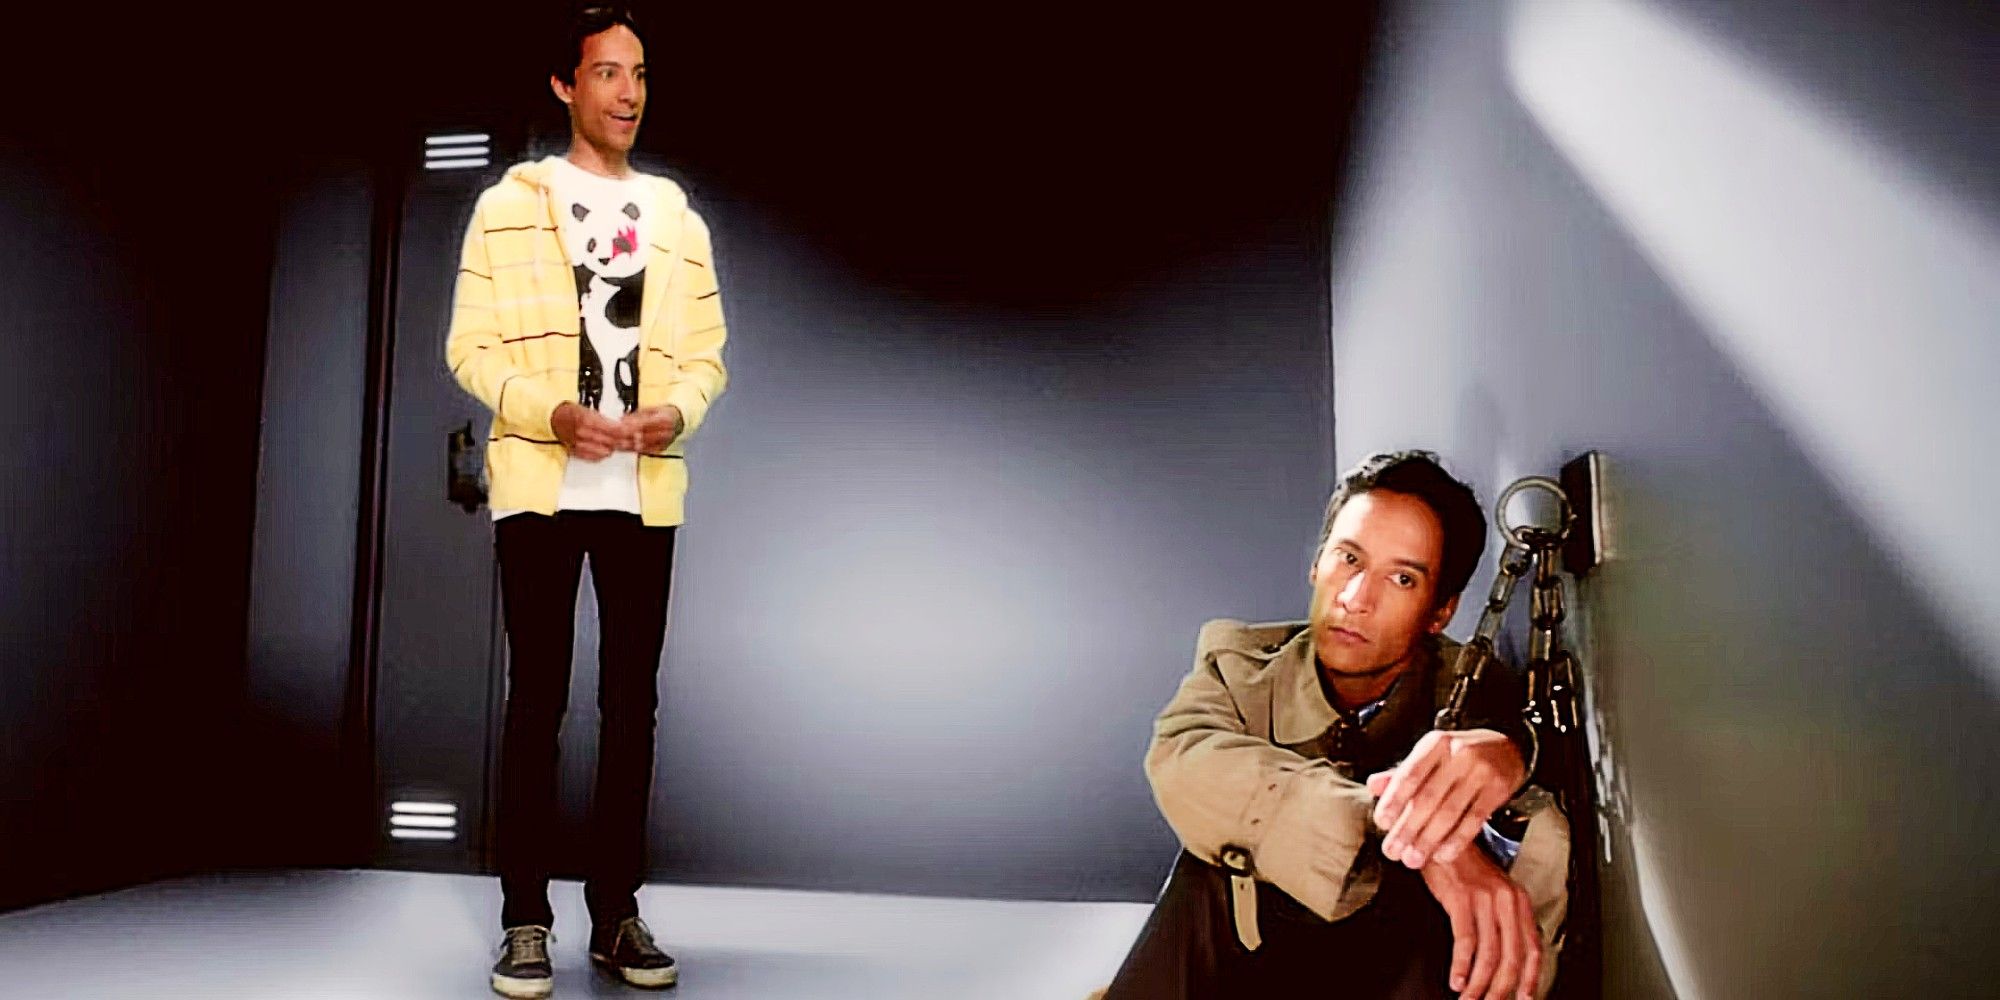 Annie-Abed and Abed in the Dreamatorium in Community